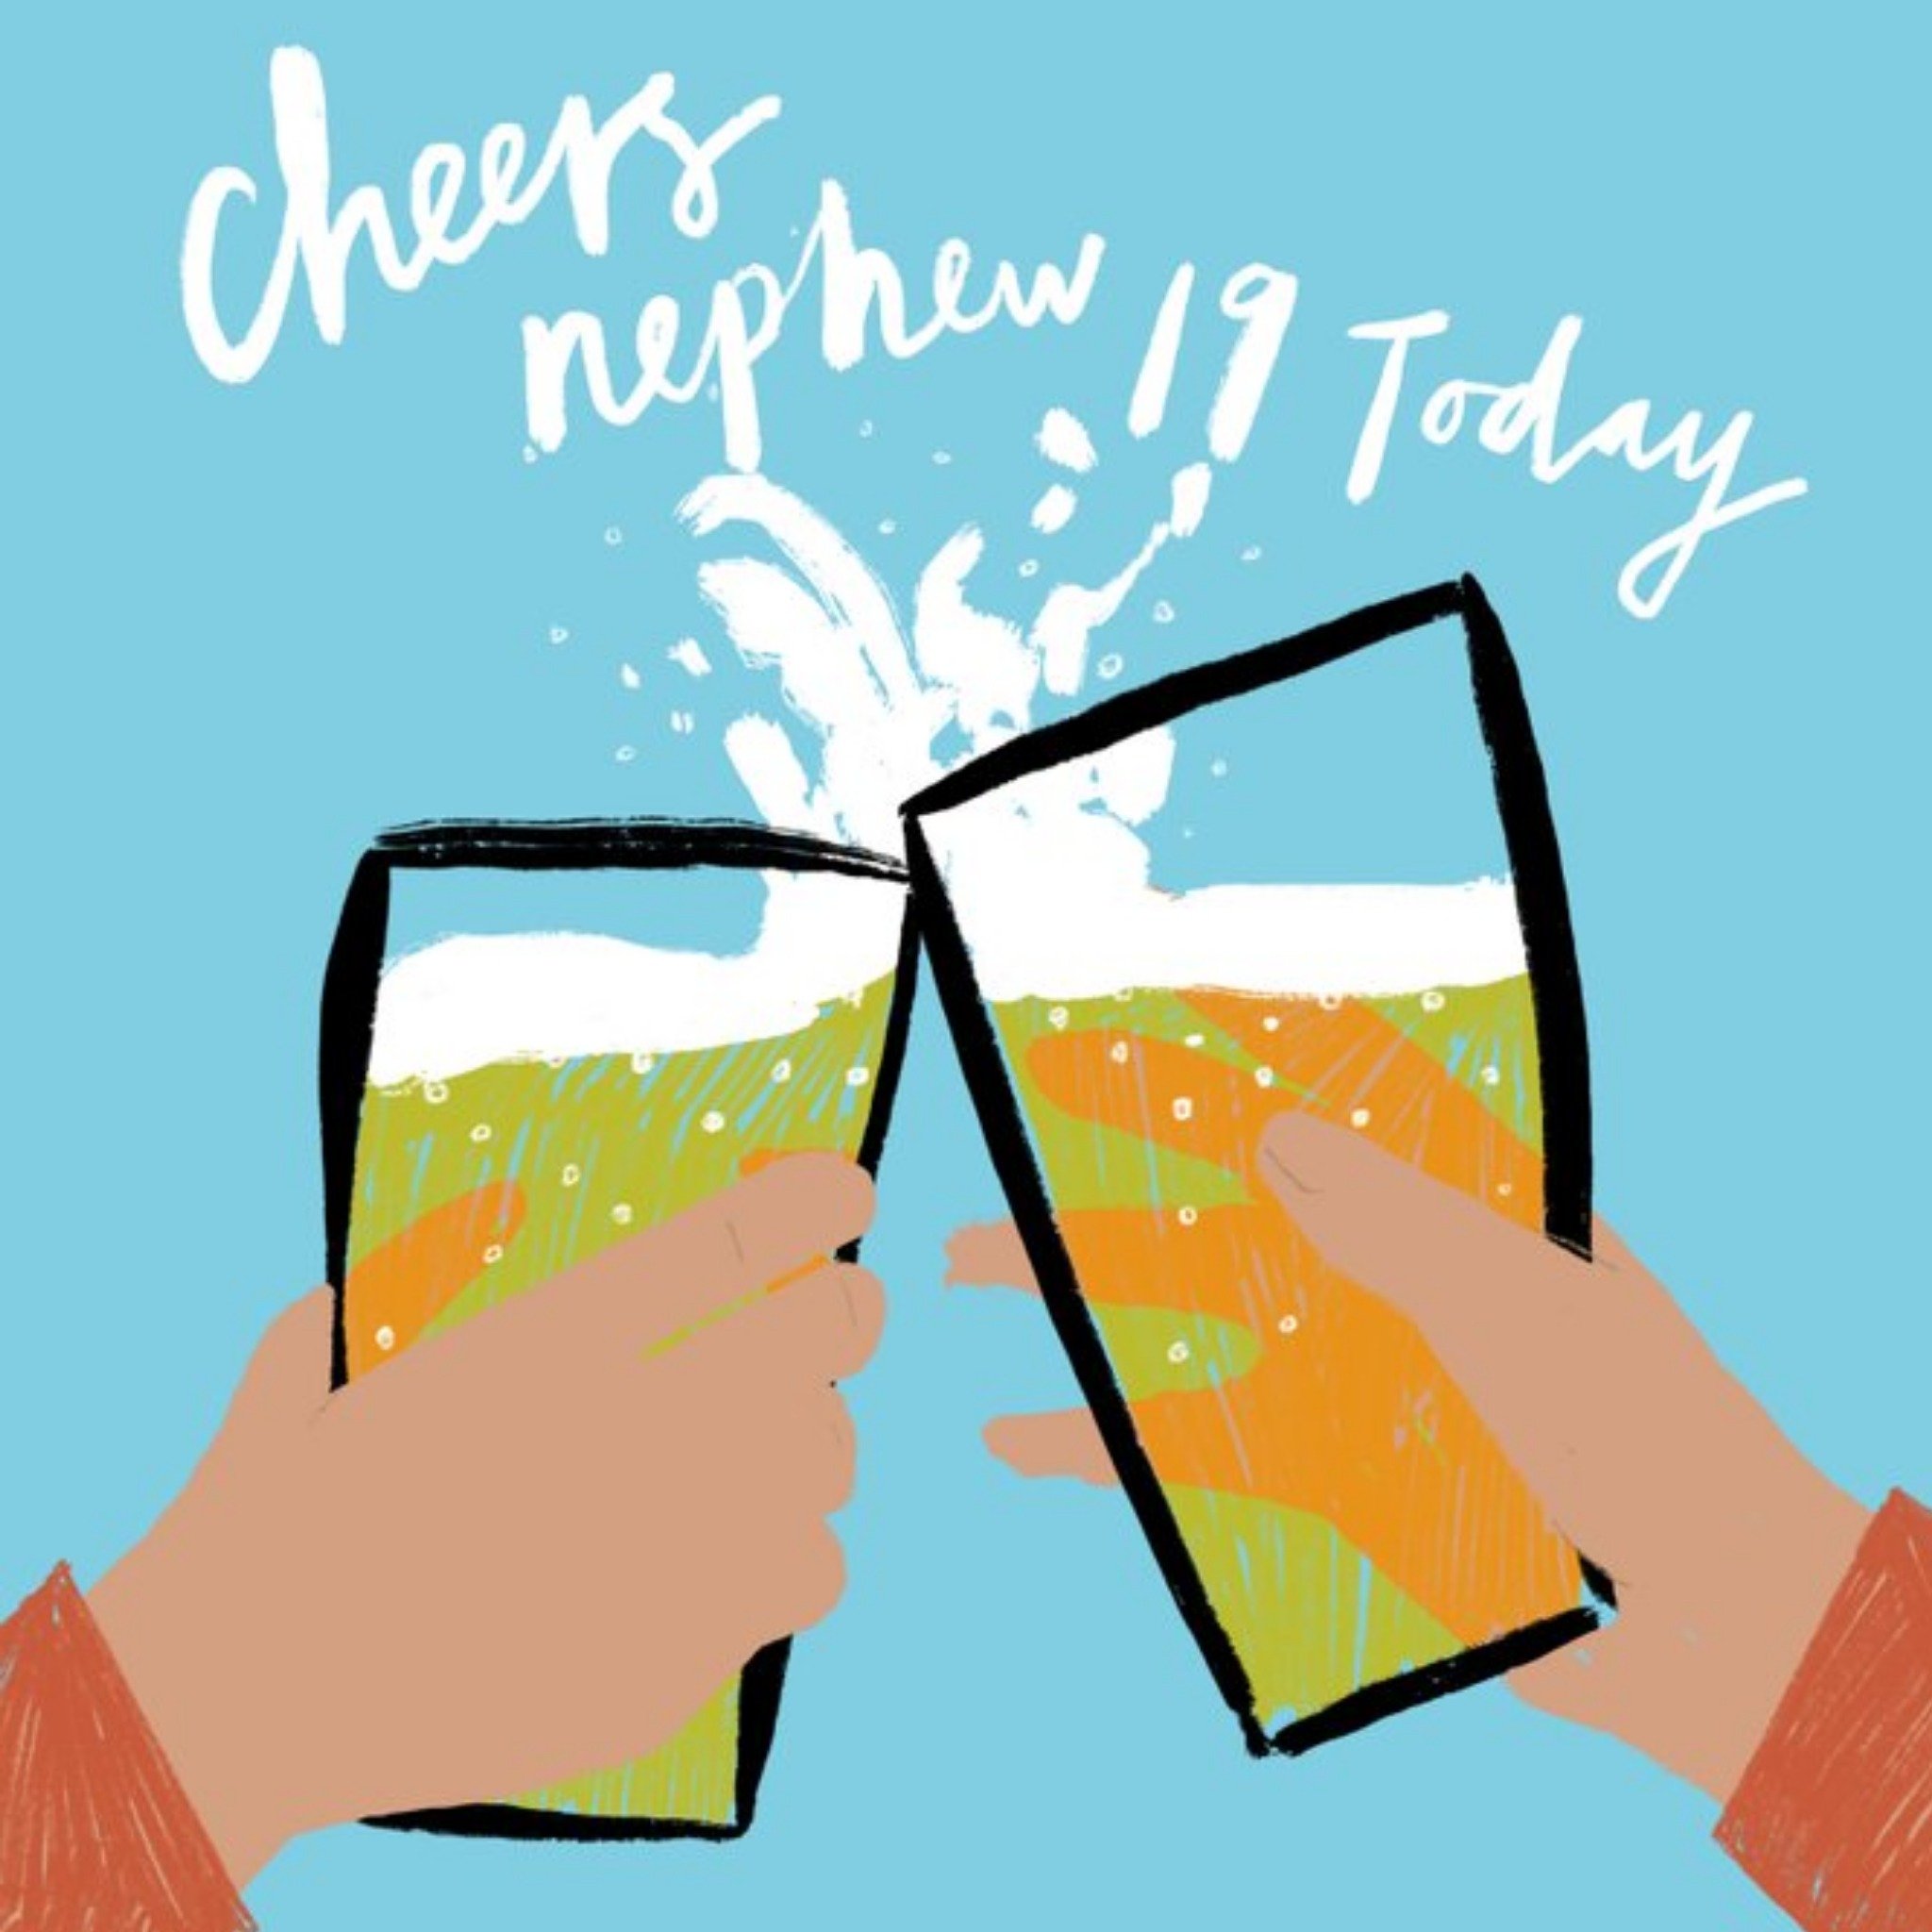 Moonpig Illustrated Cheers Nephew 19 Today Birthday Card, Large